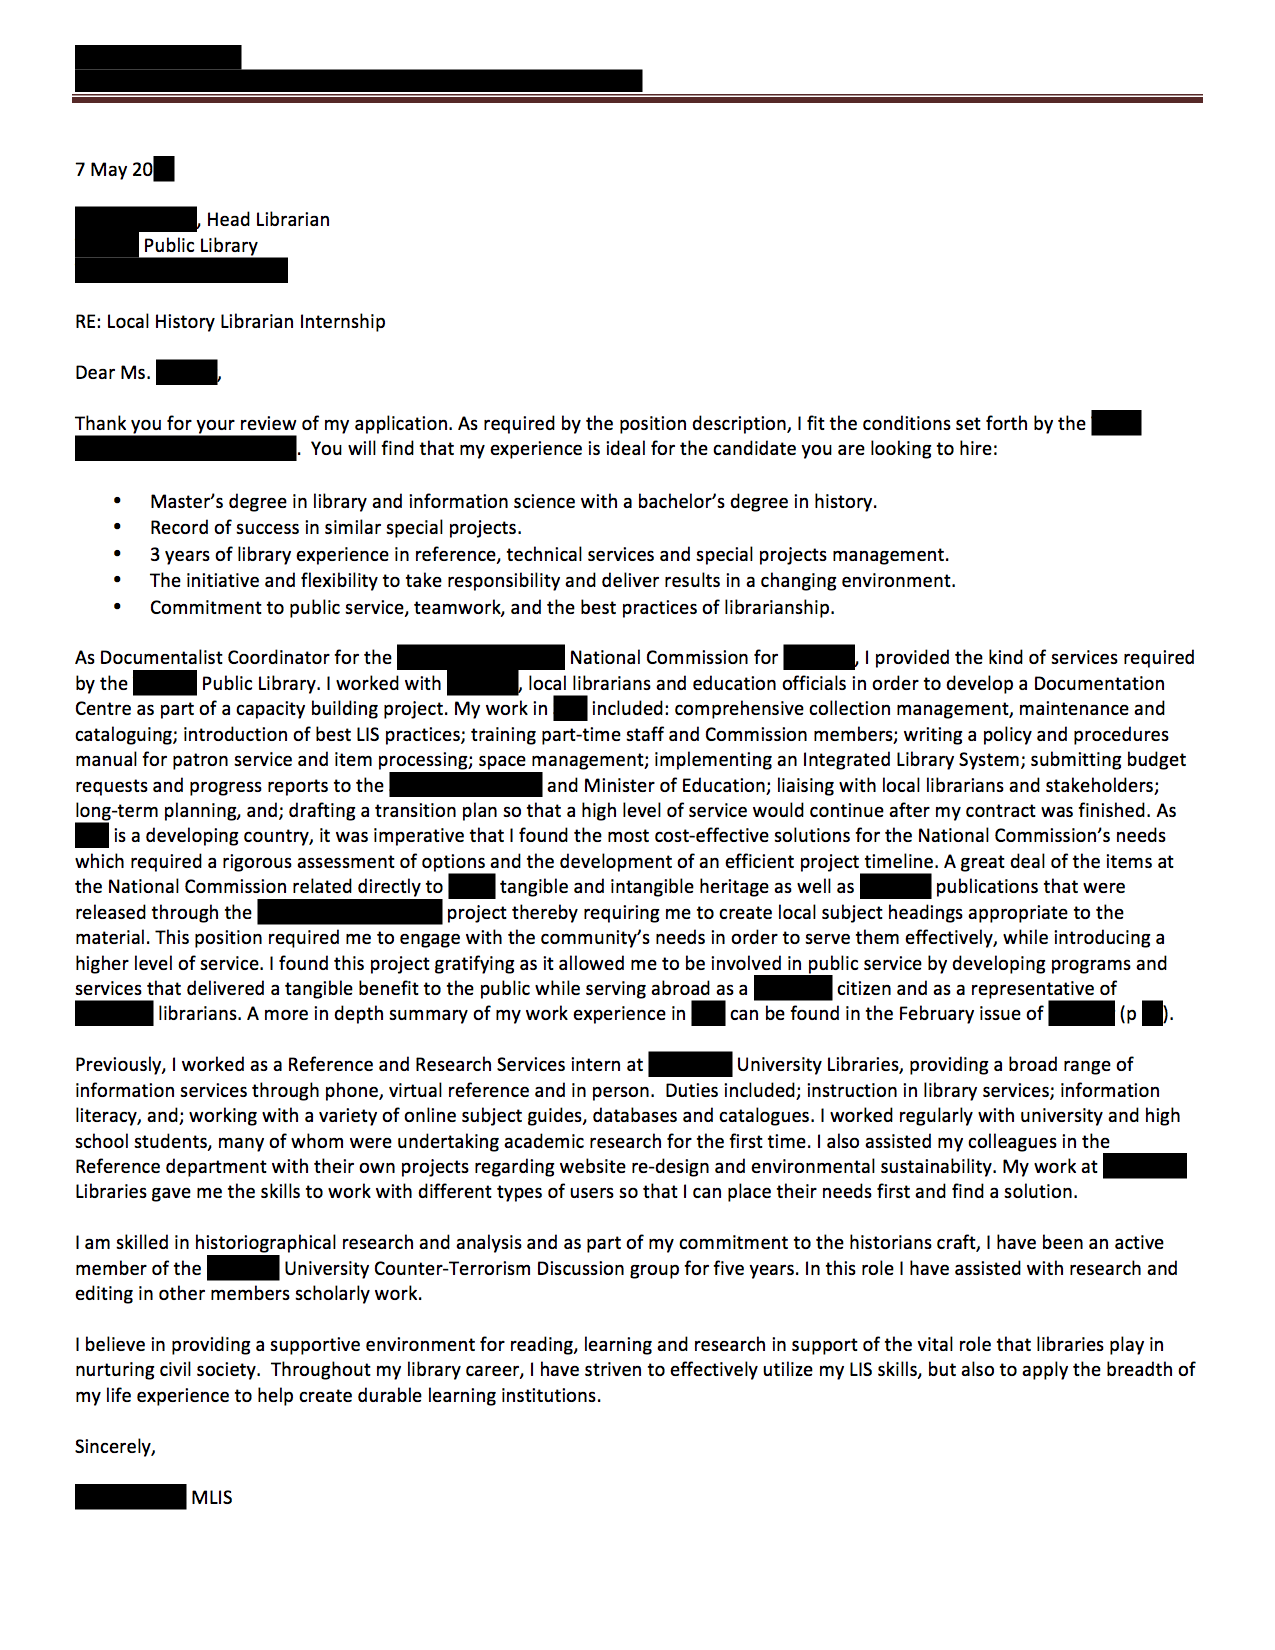 Hacking the Academic Job Cover Letter  ProfHacker - Blogs - The